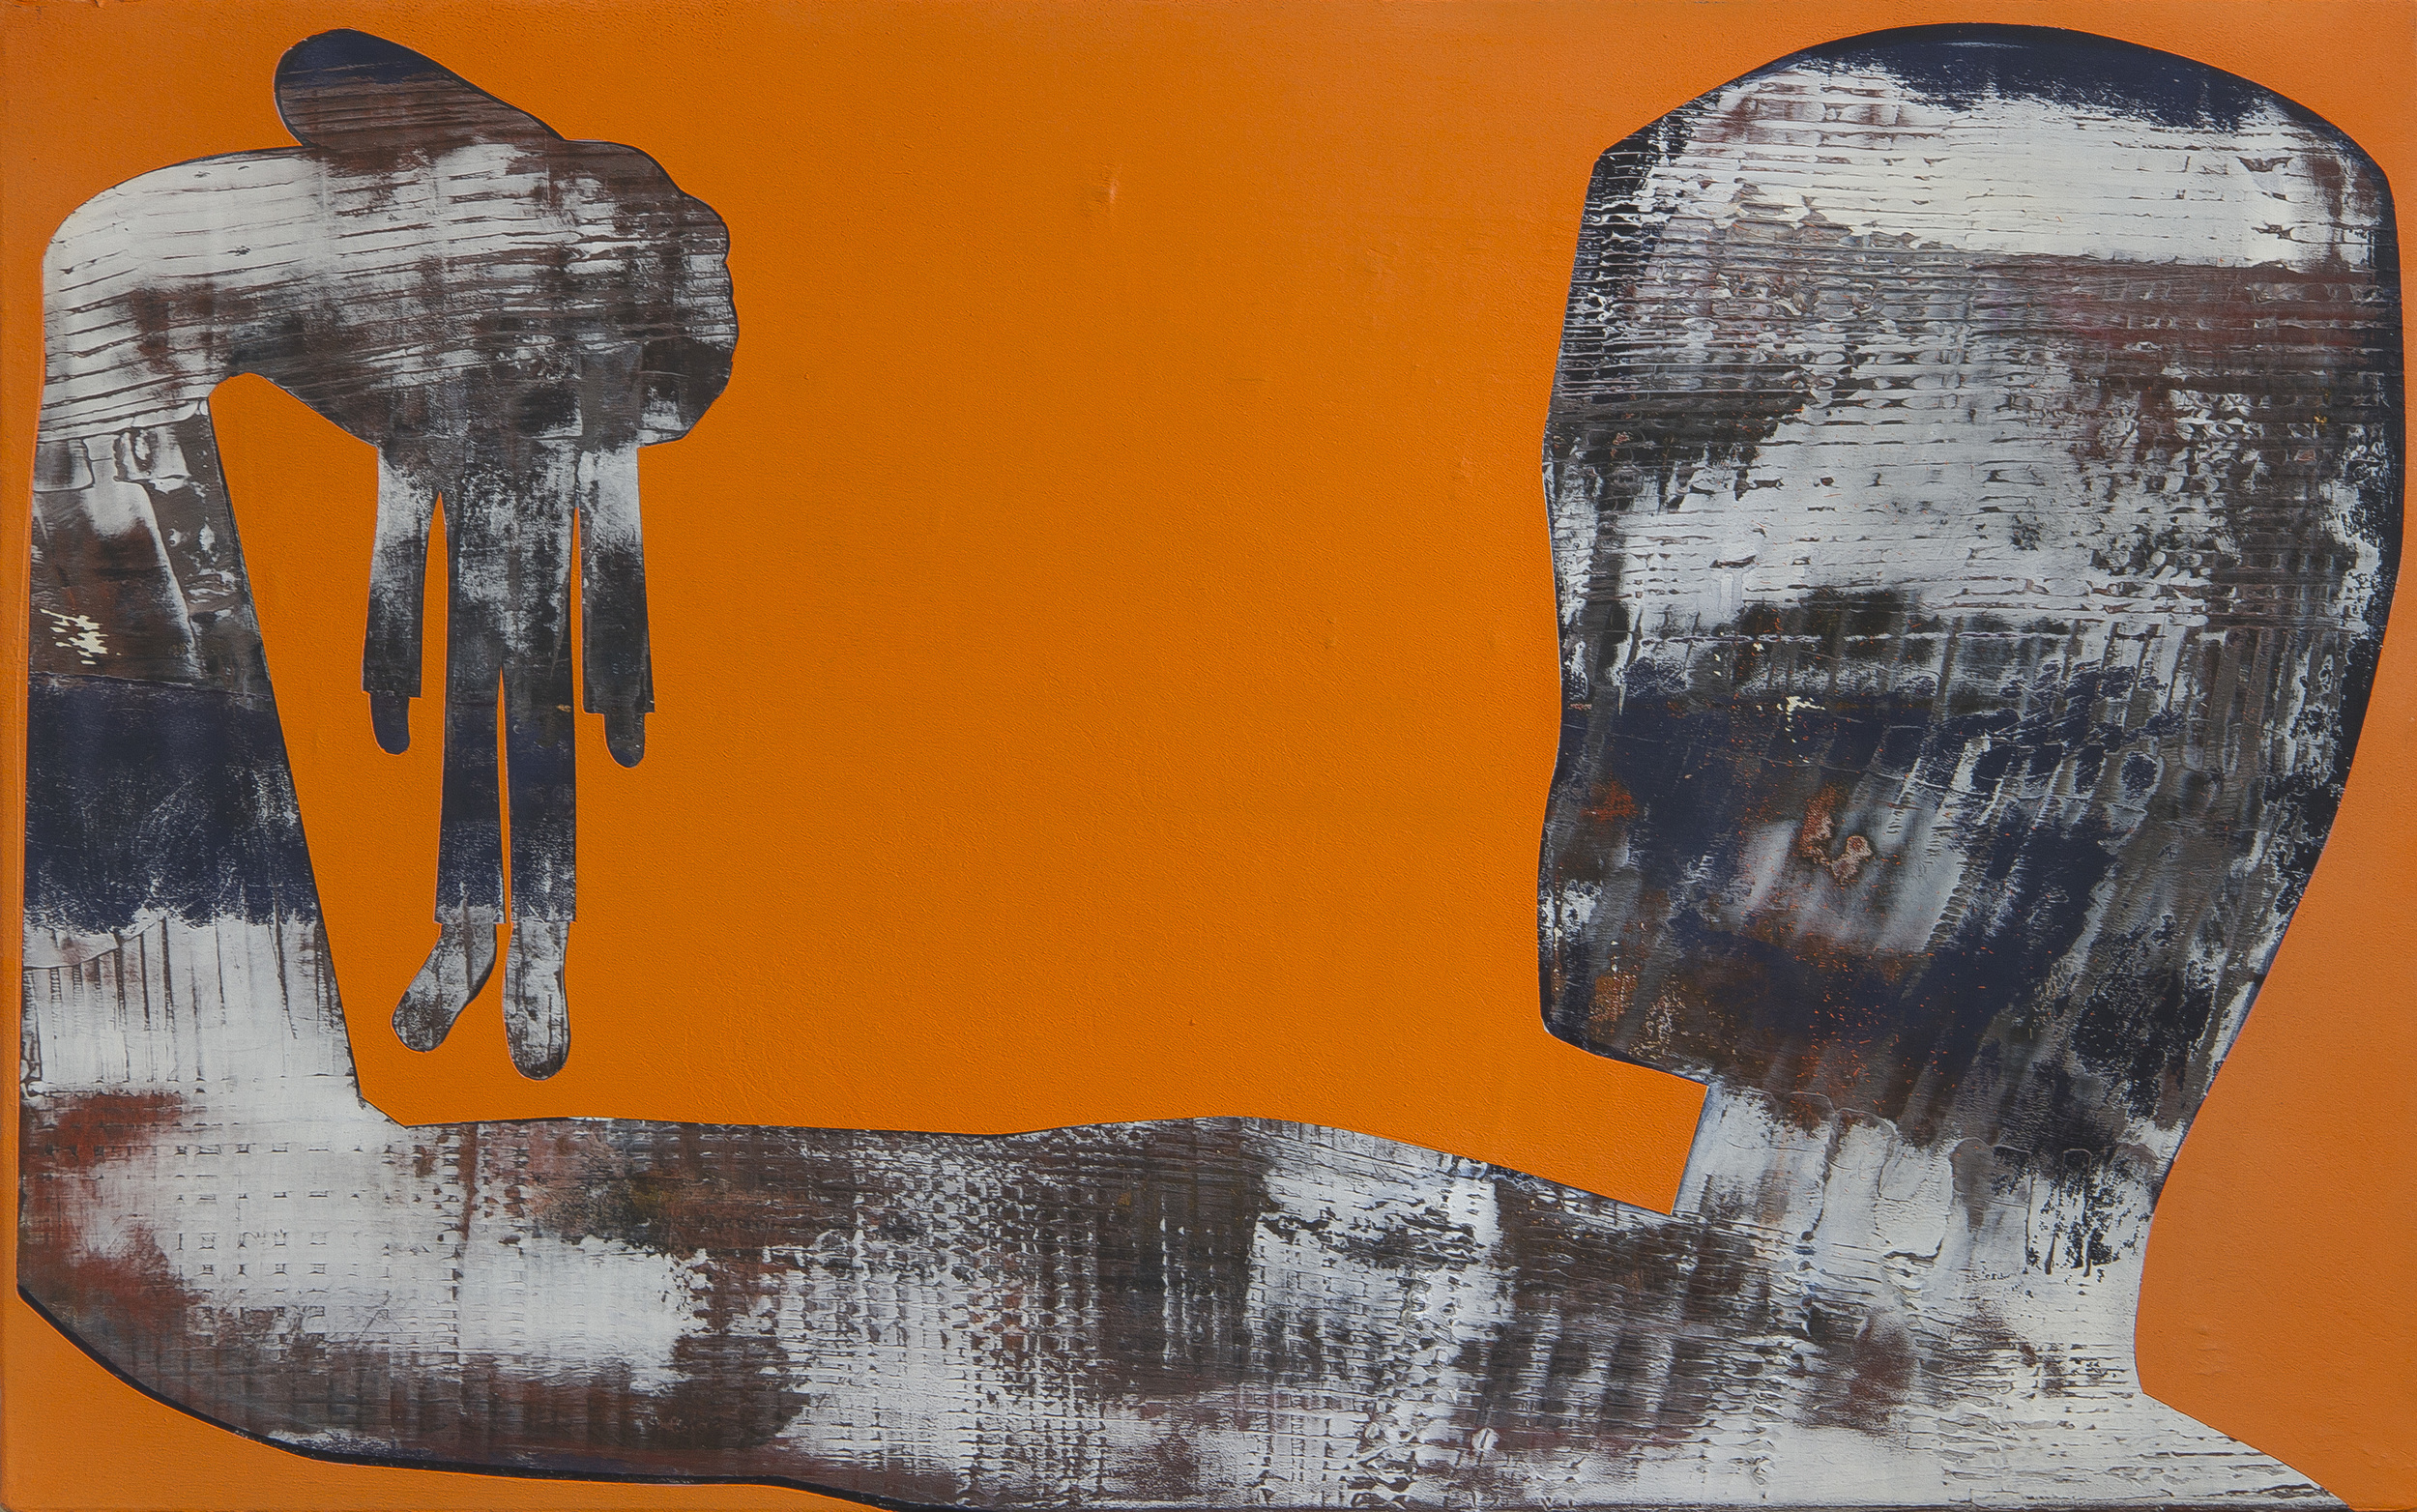  Held acrylic on canvas 30 x 48 inches 2012  unavailable   